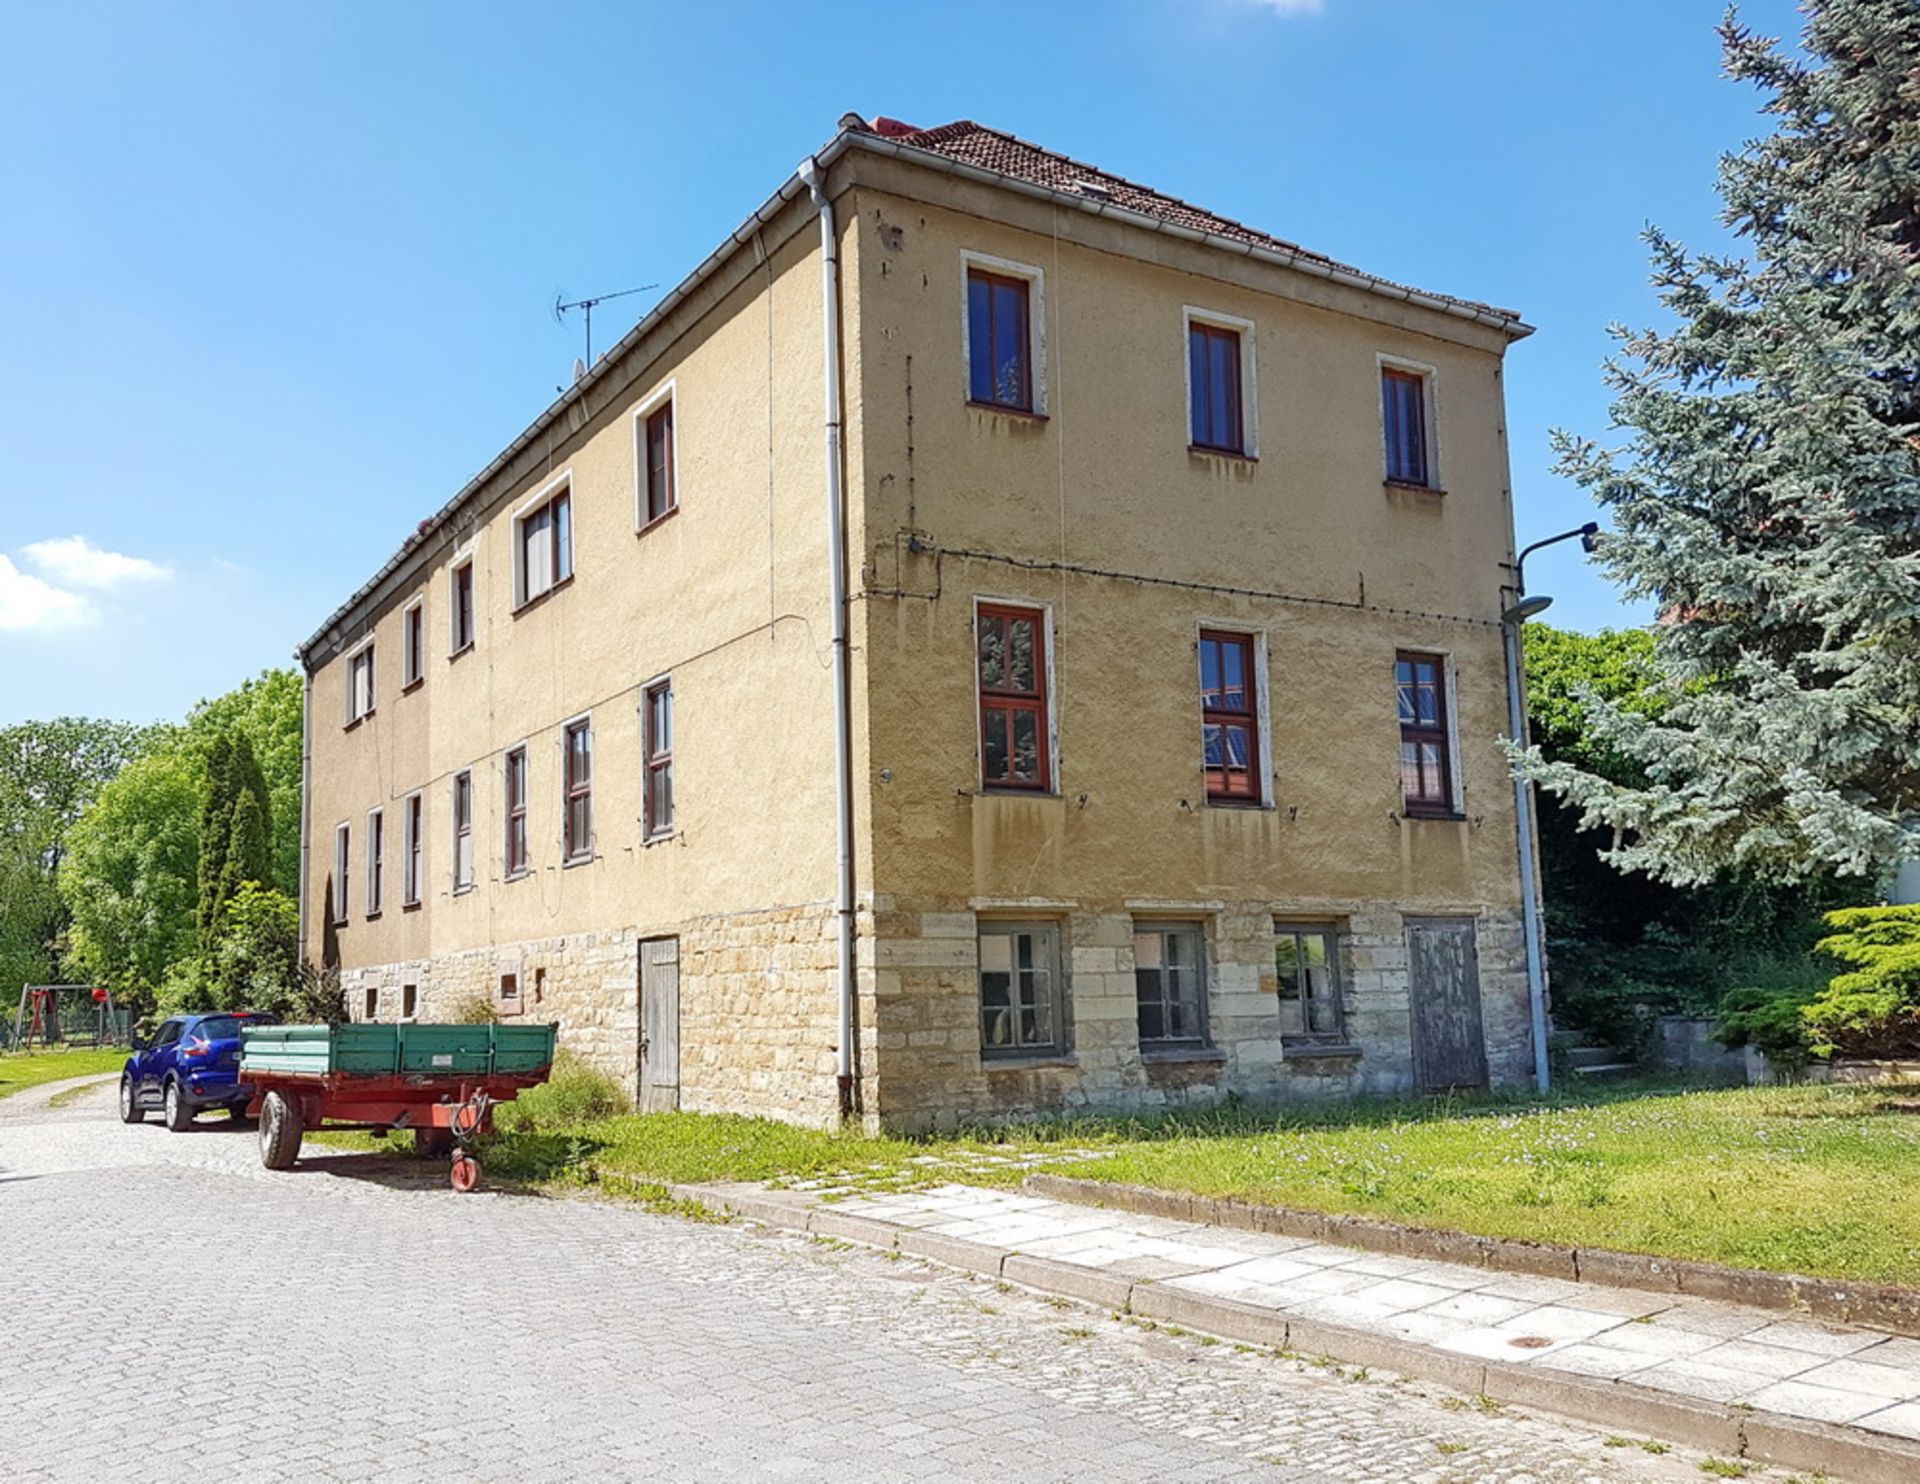 LARGE HOUSING BLOCK HORNSOMMEM, GERMANY READY TO MOVE INTO FREEHOLD VACANT POSSESSION